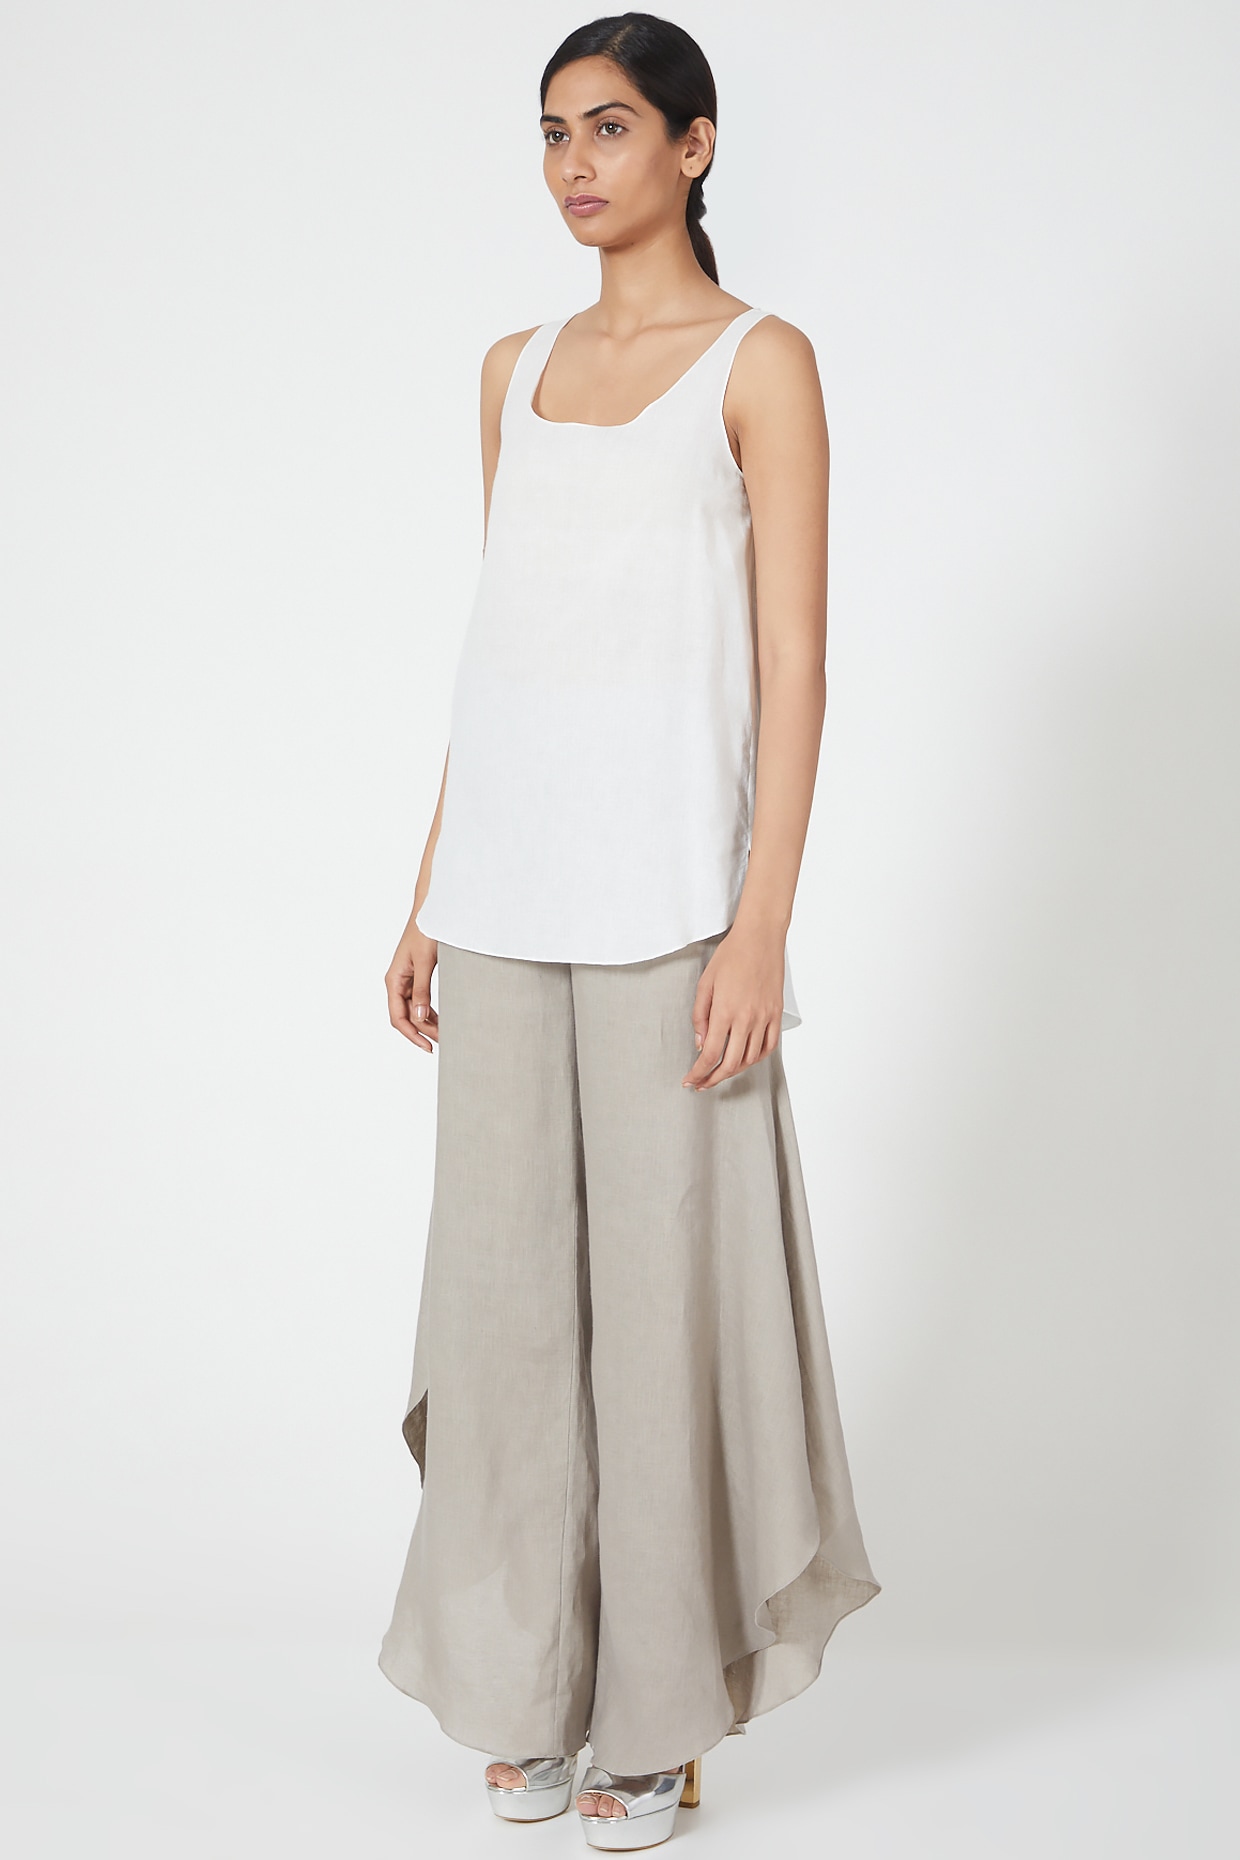 The playful palazzo pants. Natural linen - emmy design